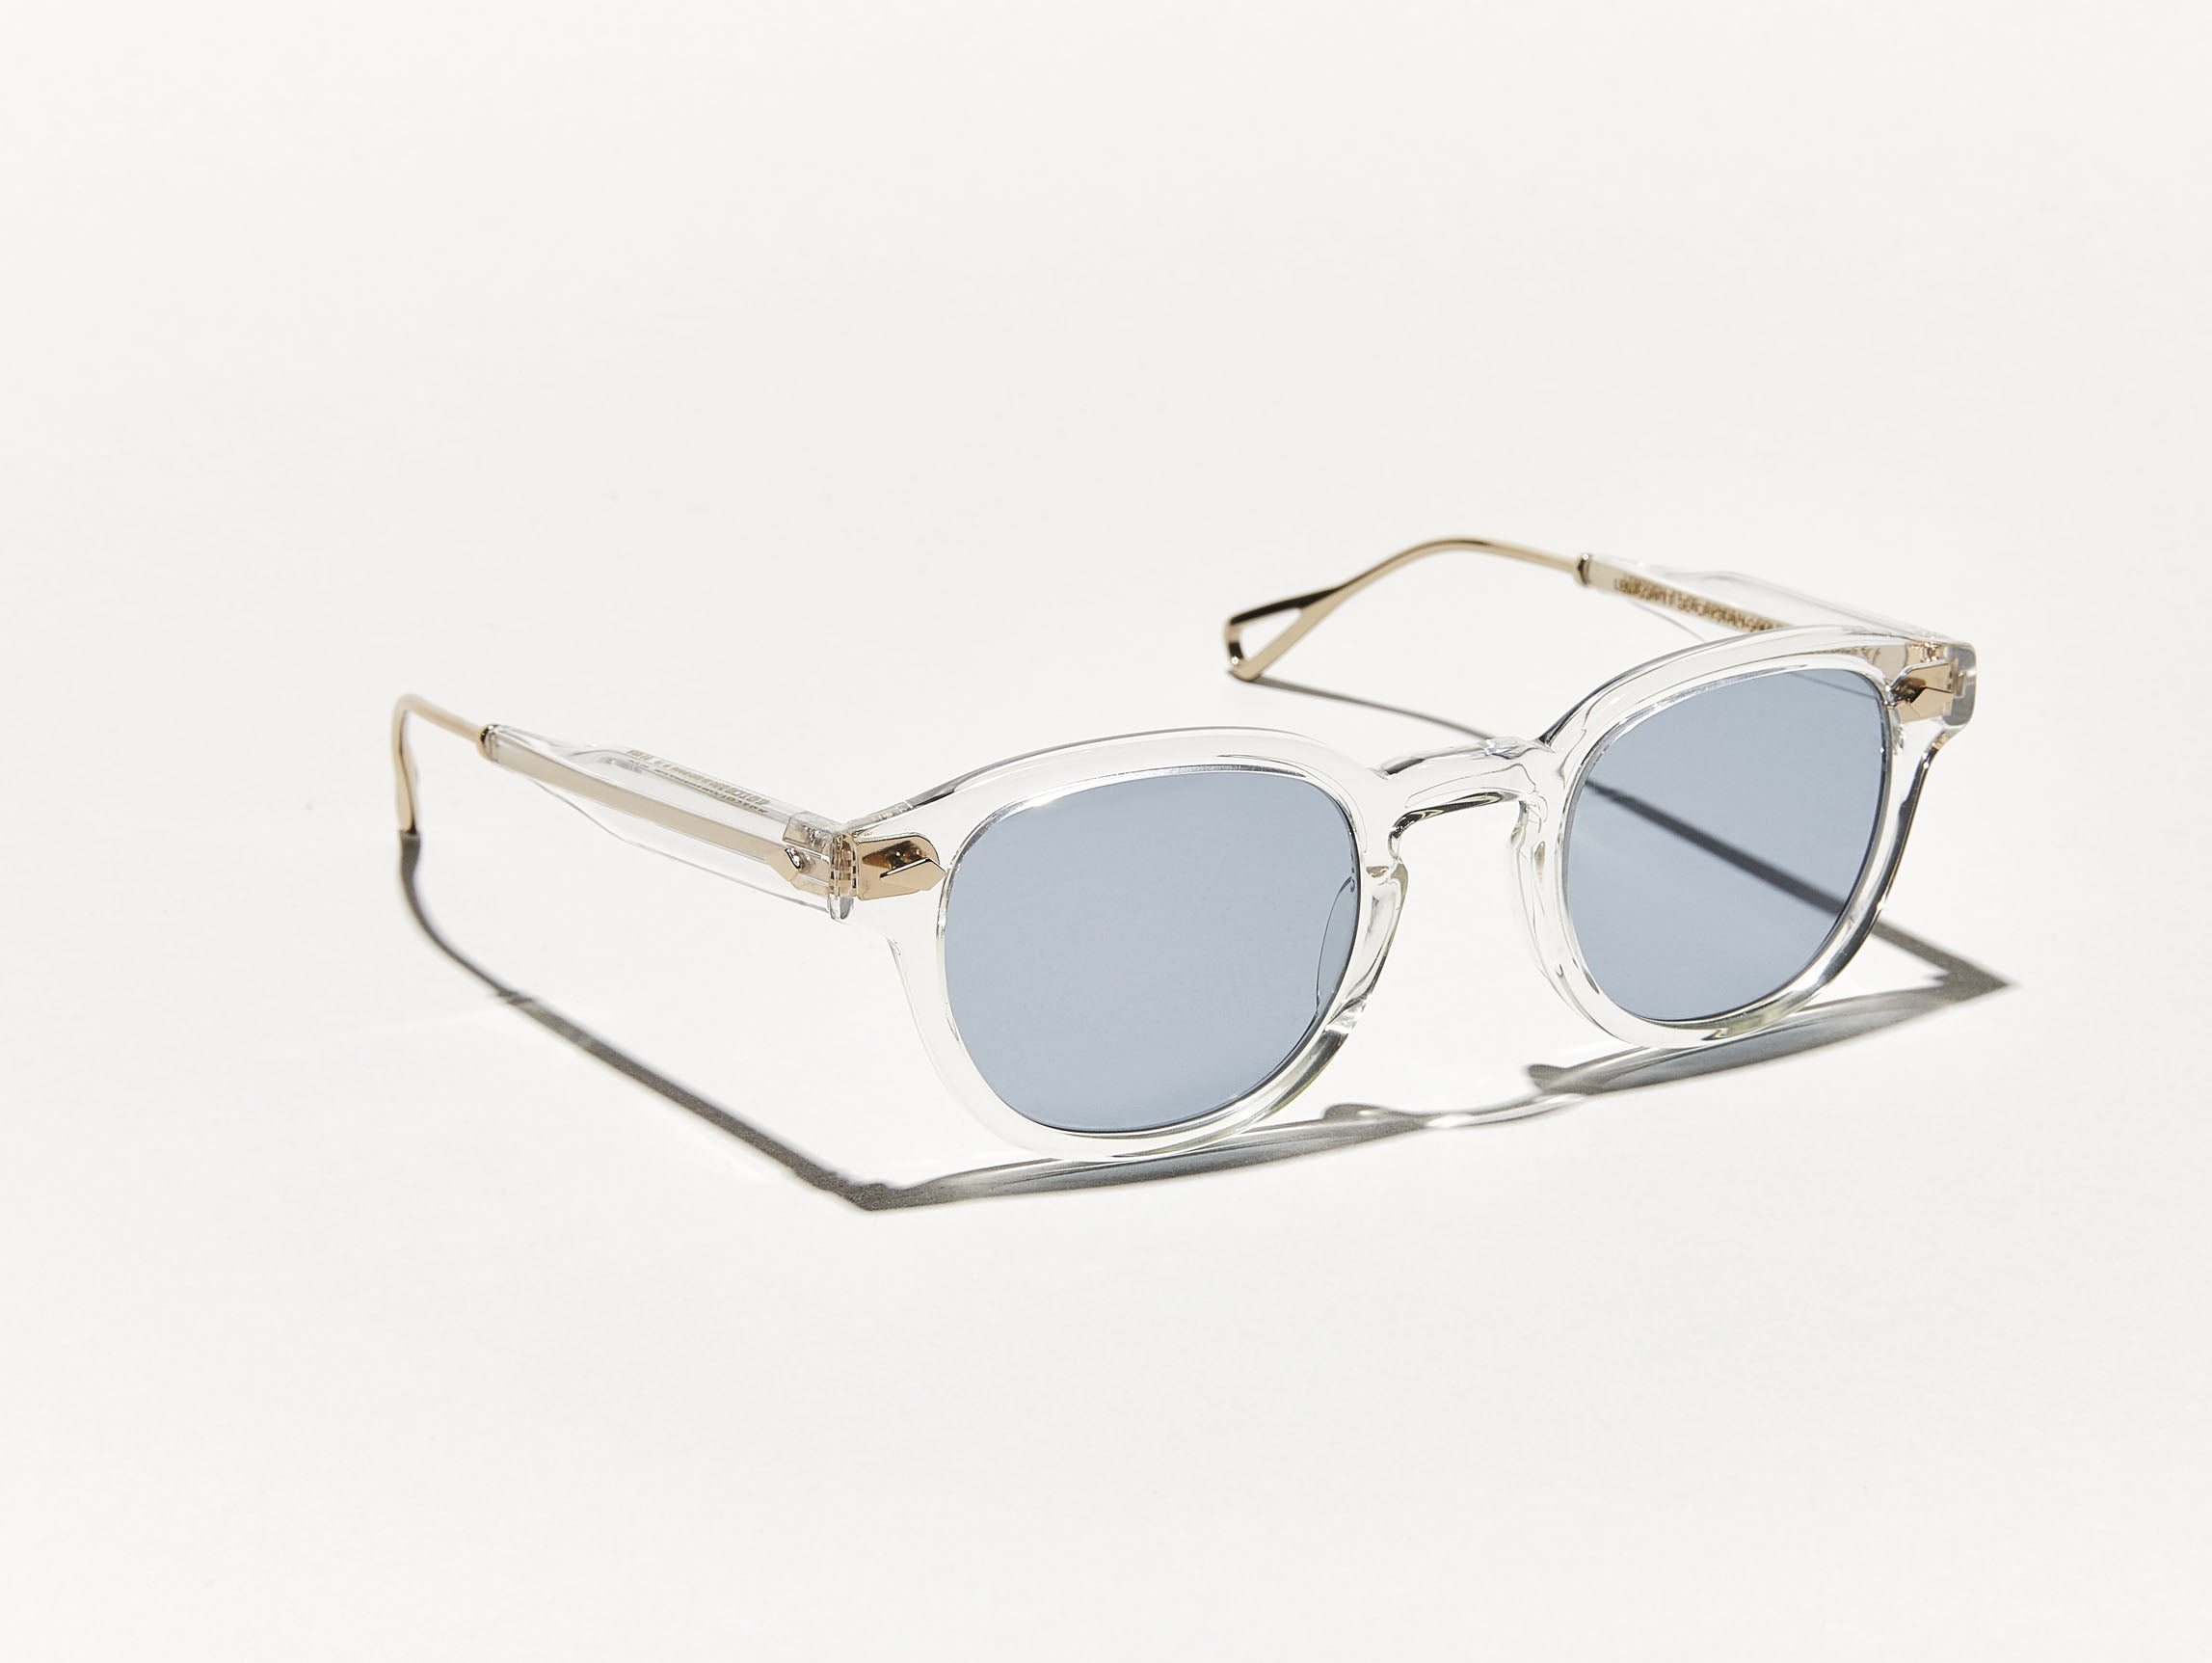 The LEMTOSH-TT SE in Crystal/Gold with Blue Glass Lenses